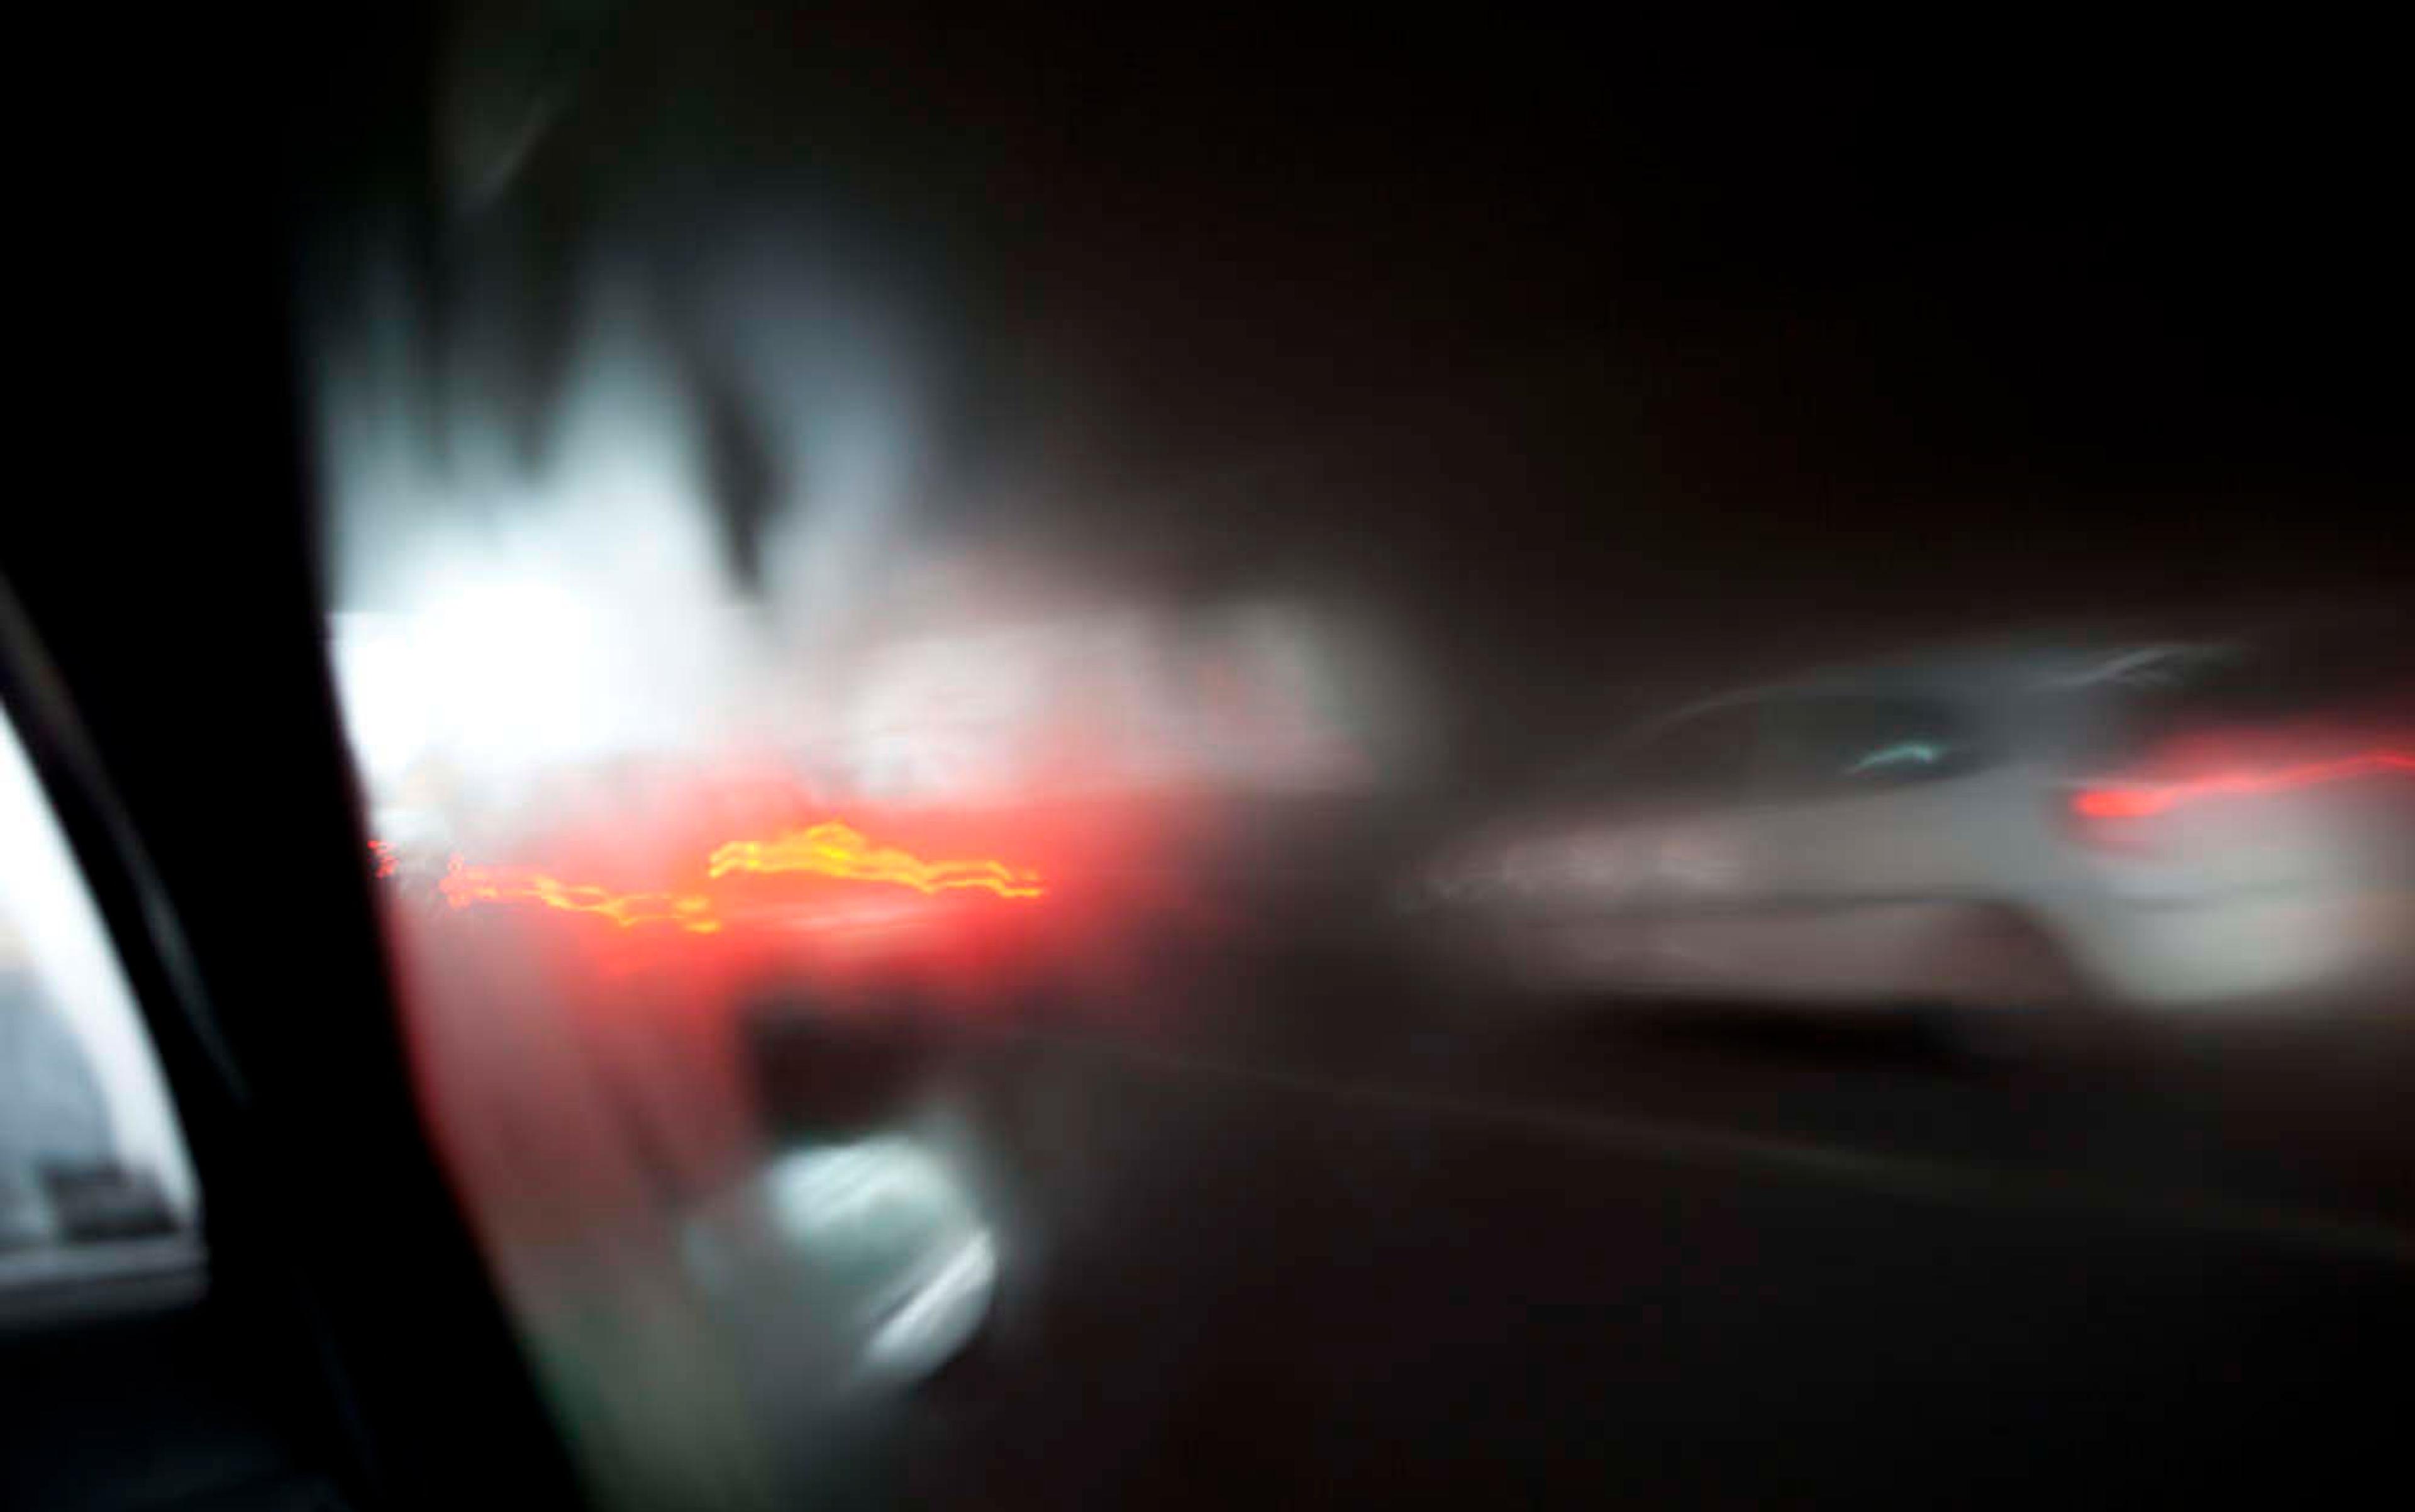 A blurred view through a car window at night with distorted bright lights